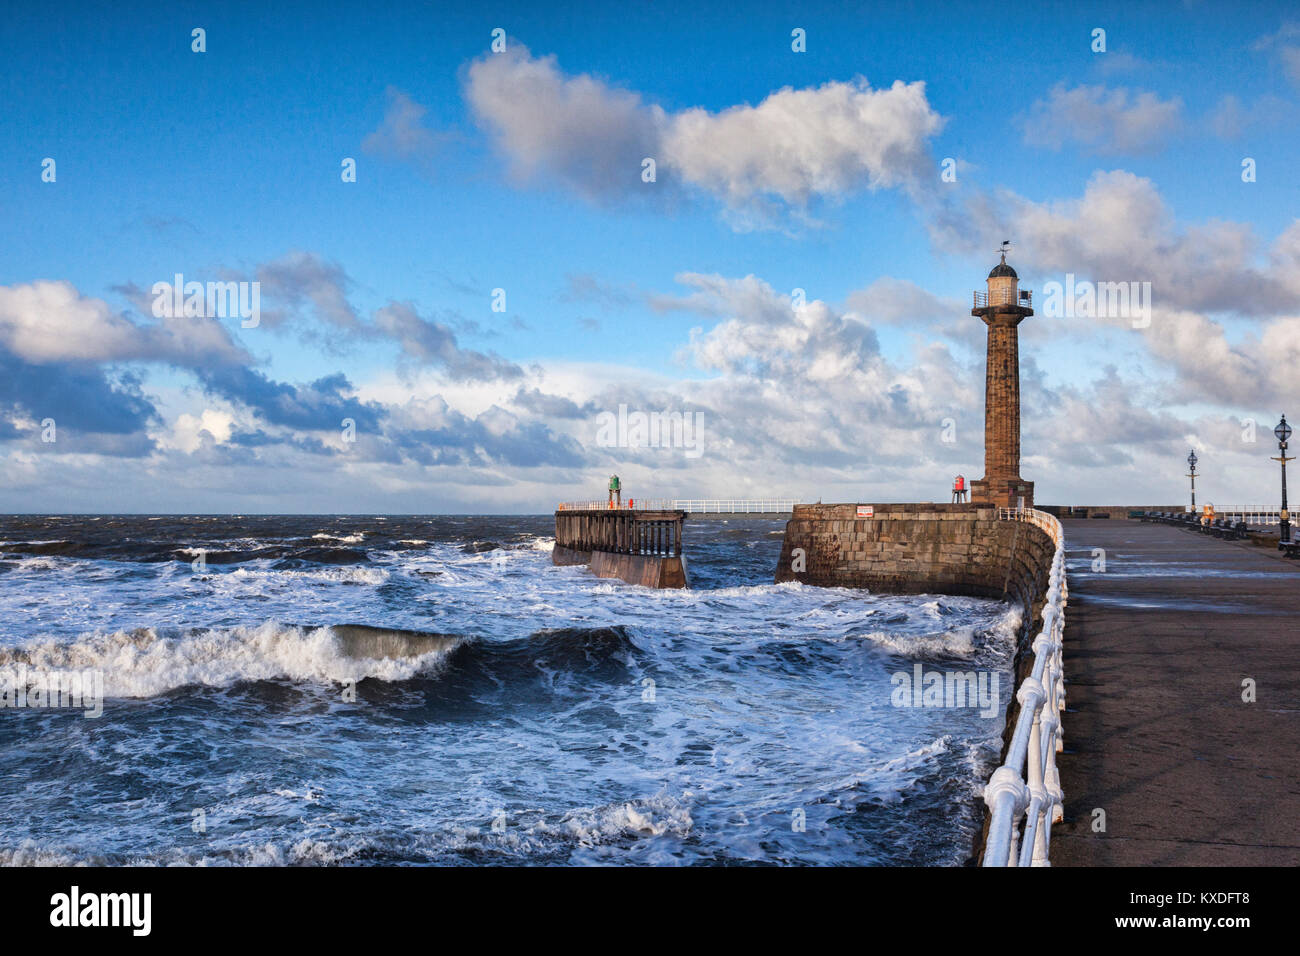 Wind and a rising tide produce rough seas at the entrance to Whitby Harbour in North Yorkshire, on a bright winter afternoon. Stock Photo